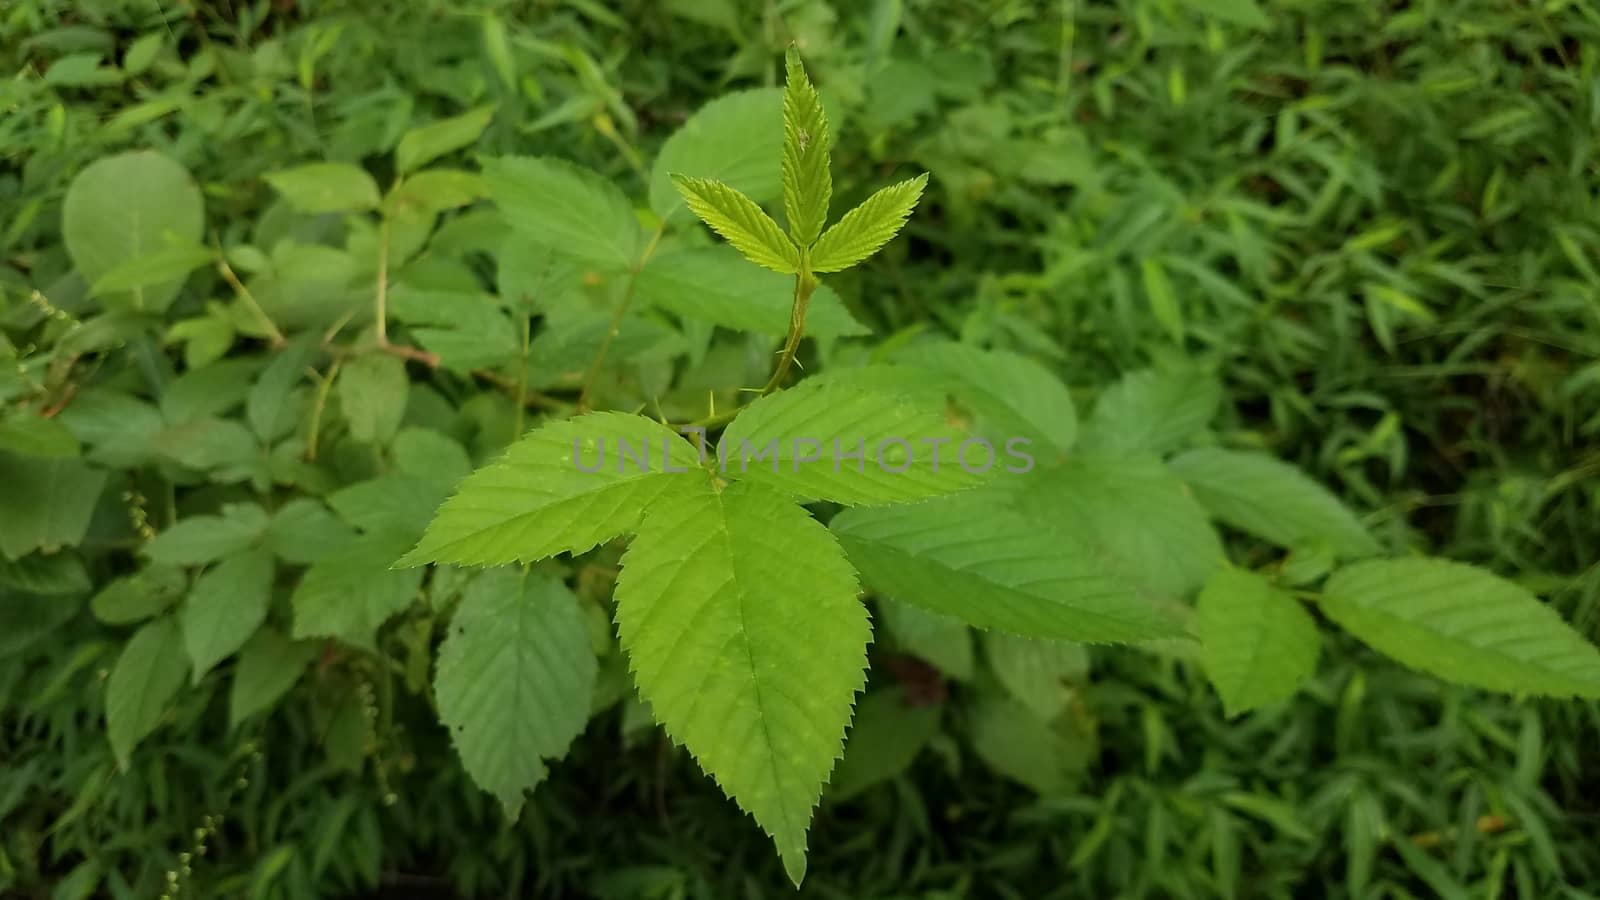 poison ivy plant with green leaves and thorns by stockphotofan1